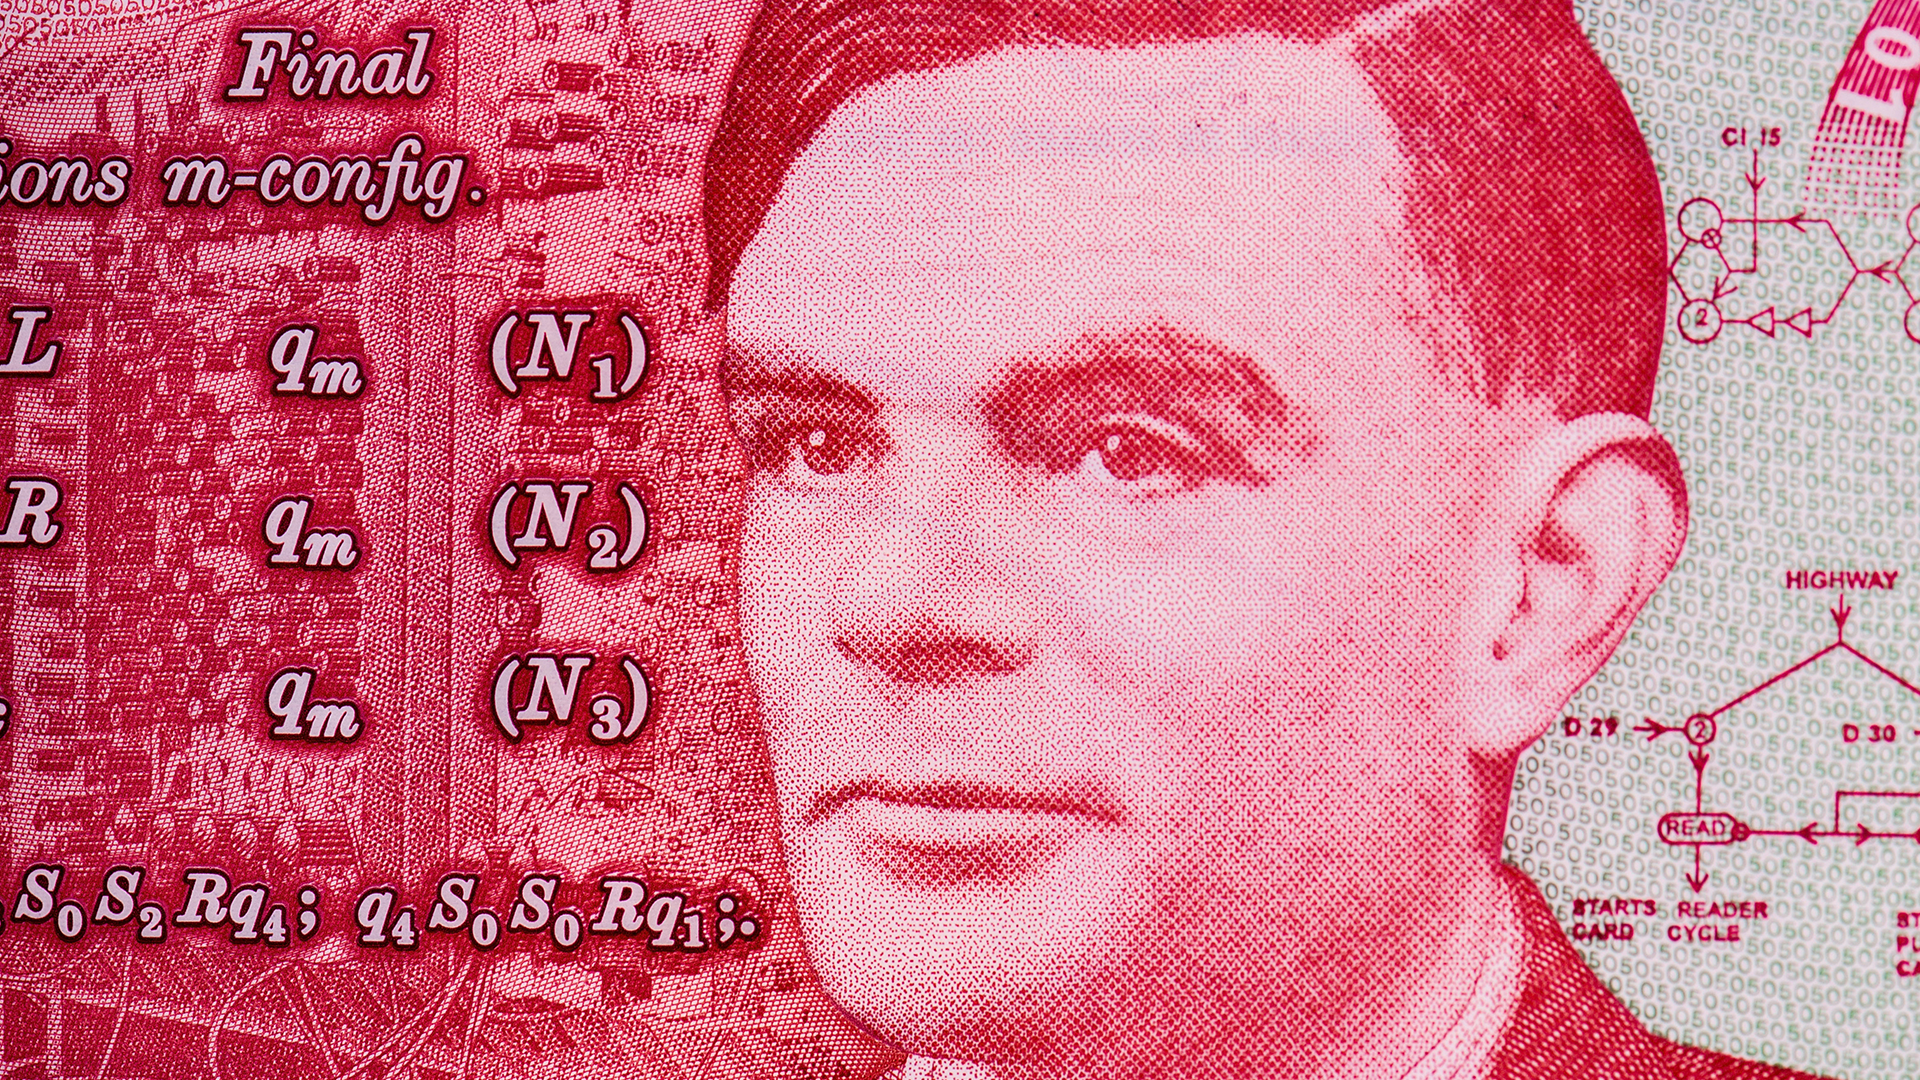 8 things you didn't know about Alan Turing